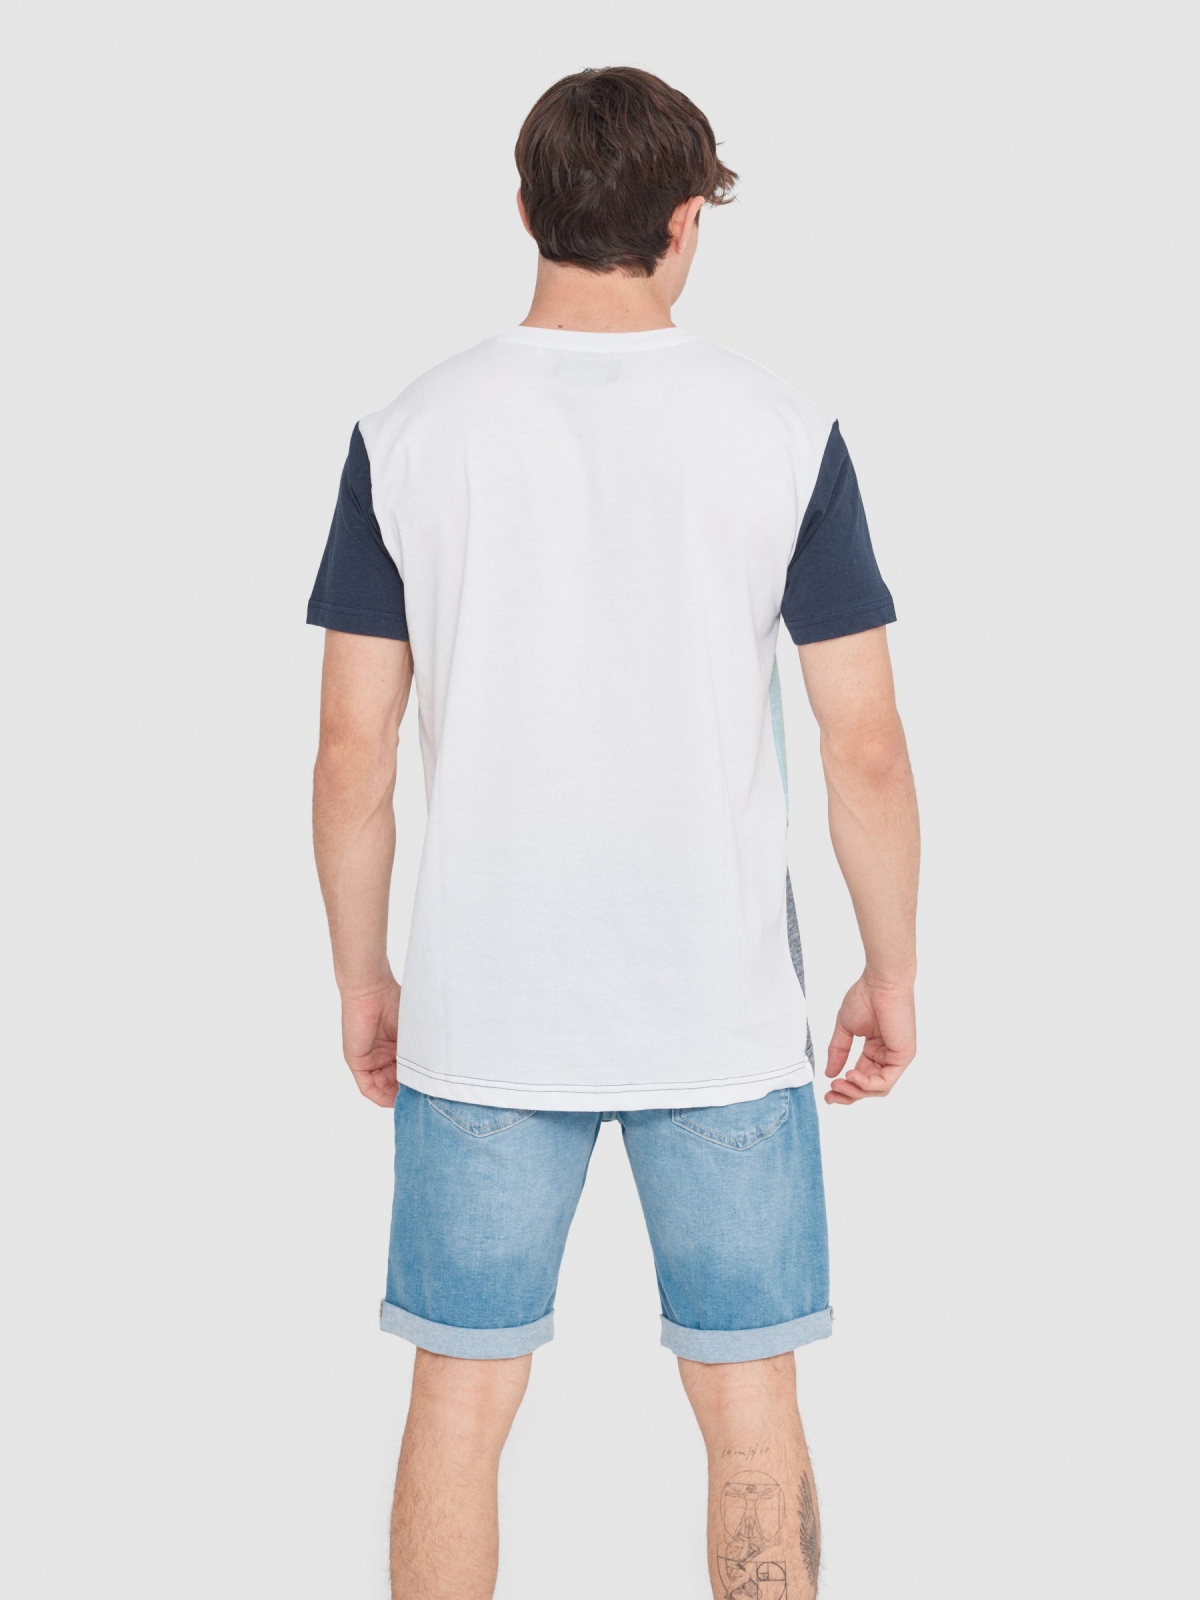 Textured colour block t-shirt white middle back view